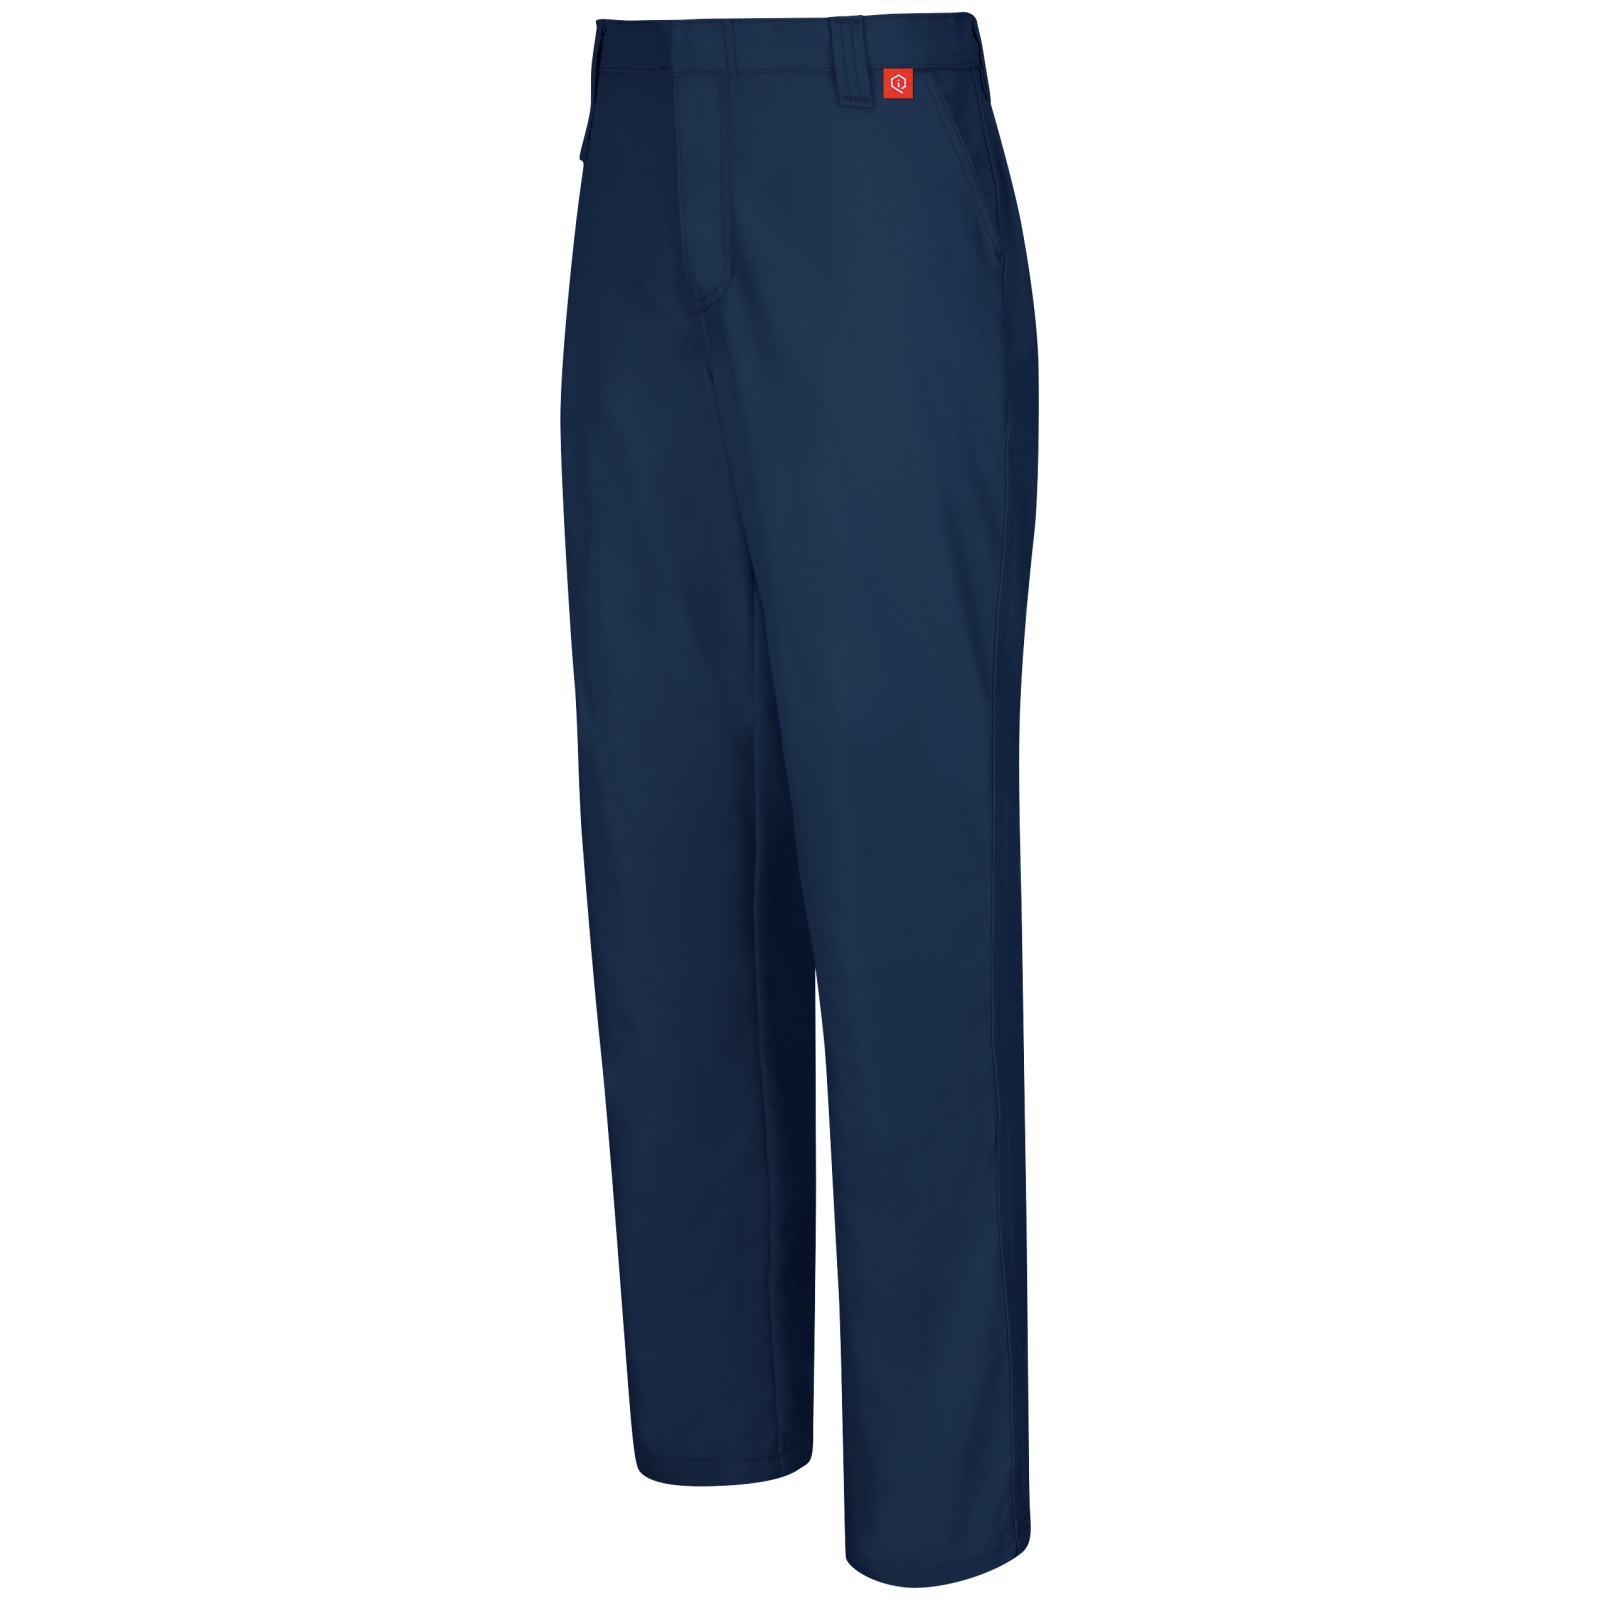 Click Fire Flame Retardant Anti Static Navy Blue Work Safety Trousers Pants FR 